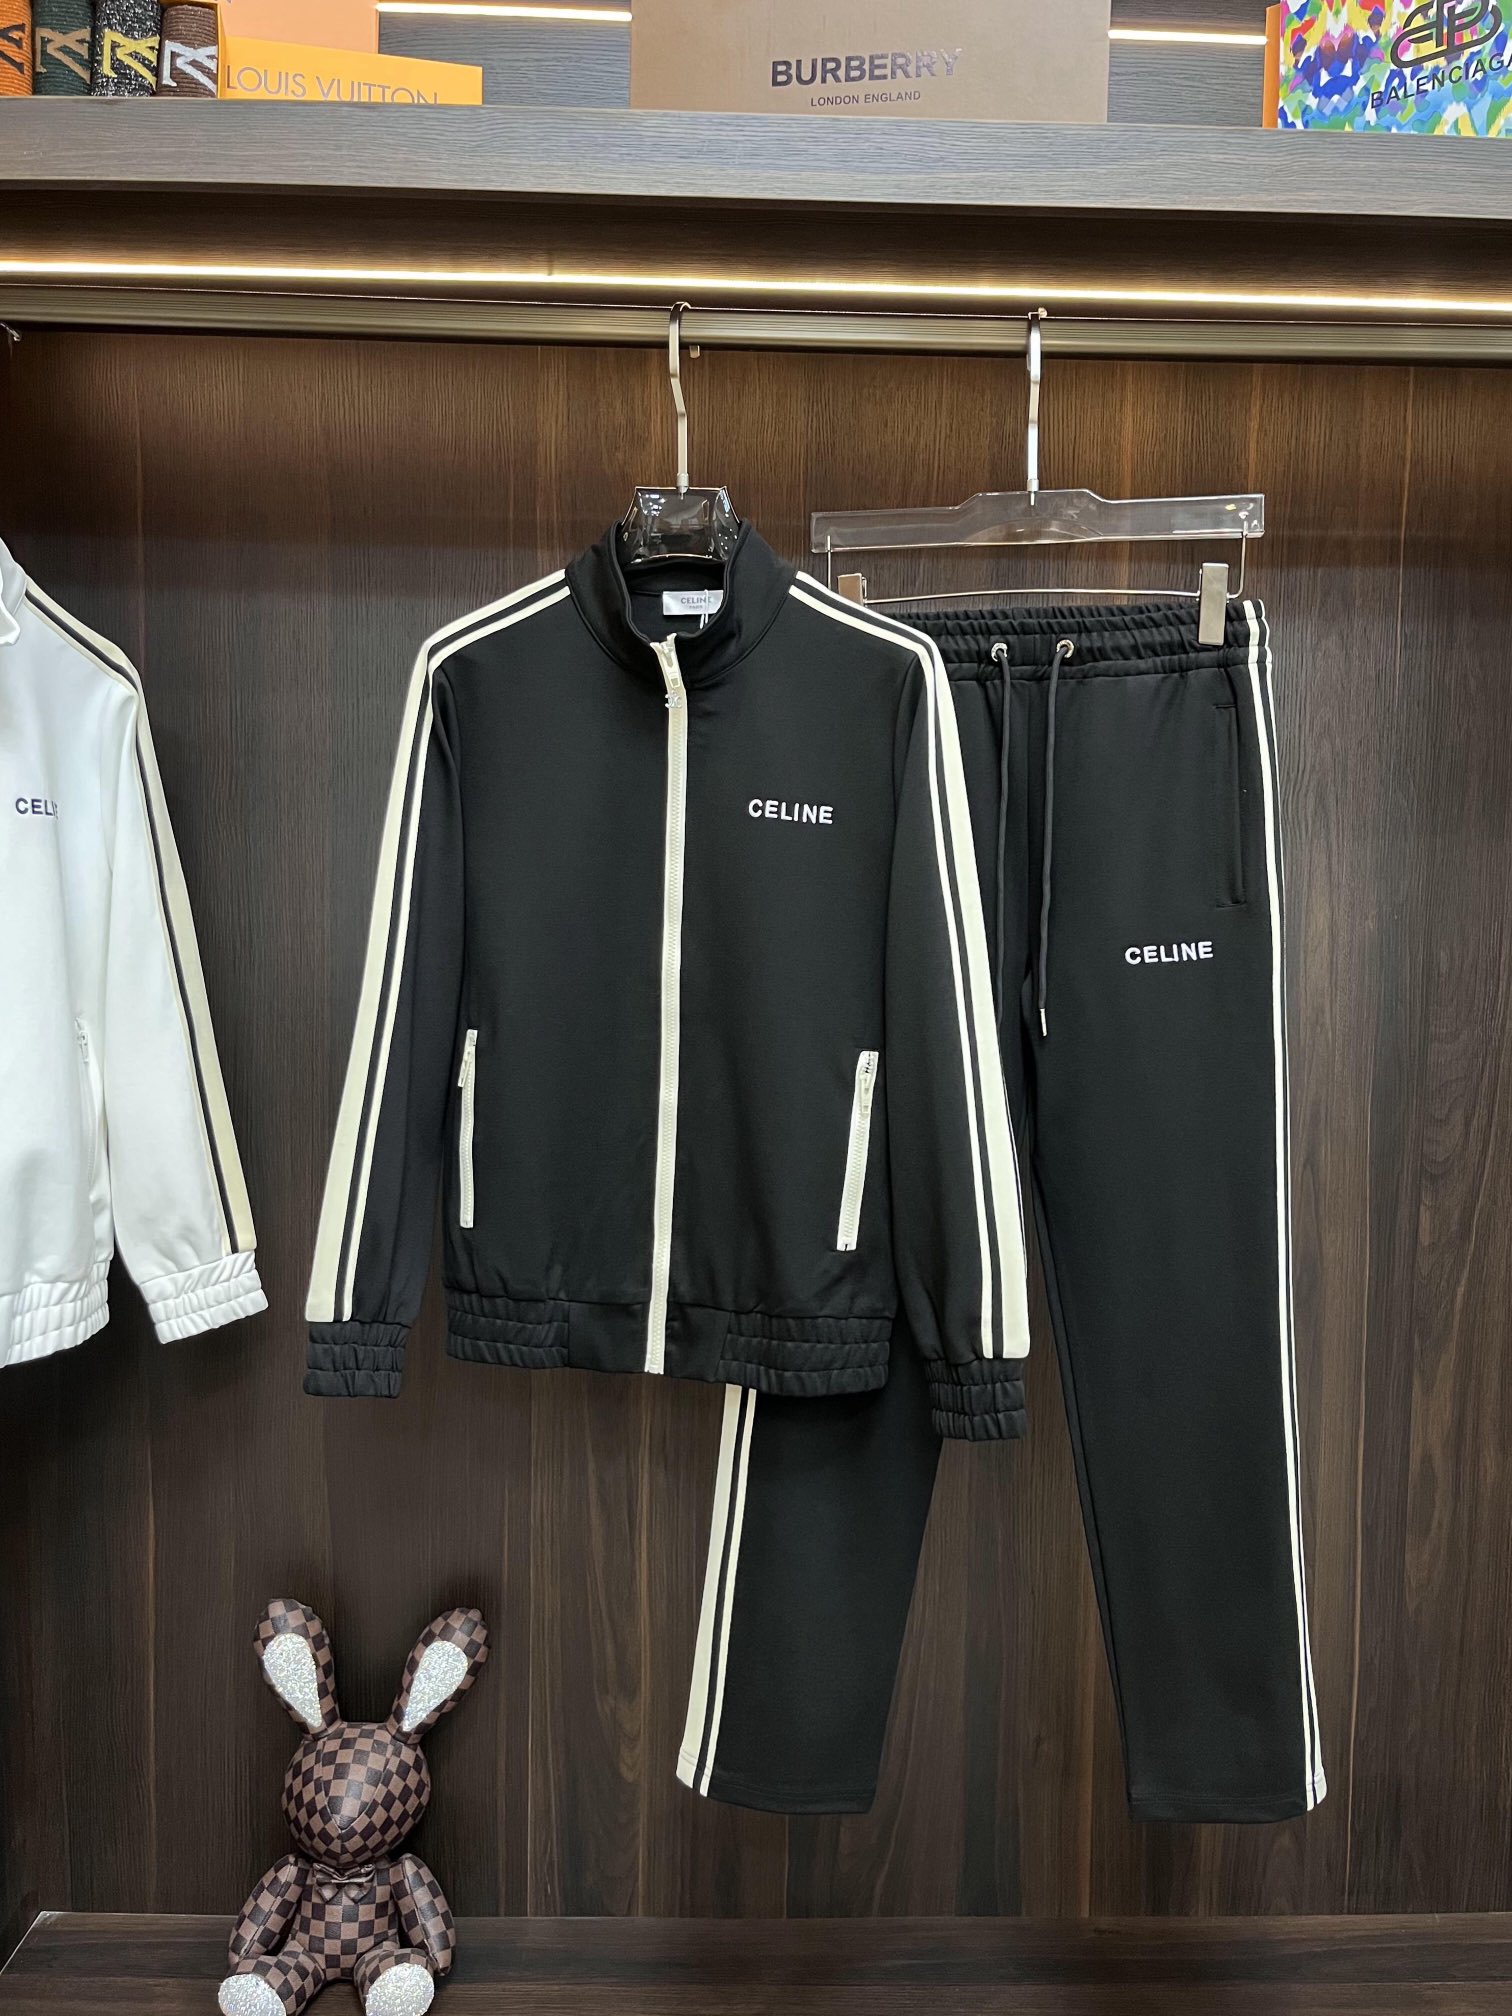 Celine Clothing Cardigans Black White Embroidery Cotton Fall/Winter Collection Sweatpants